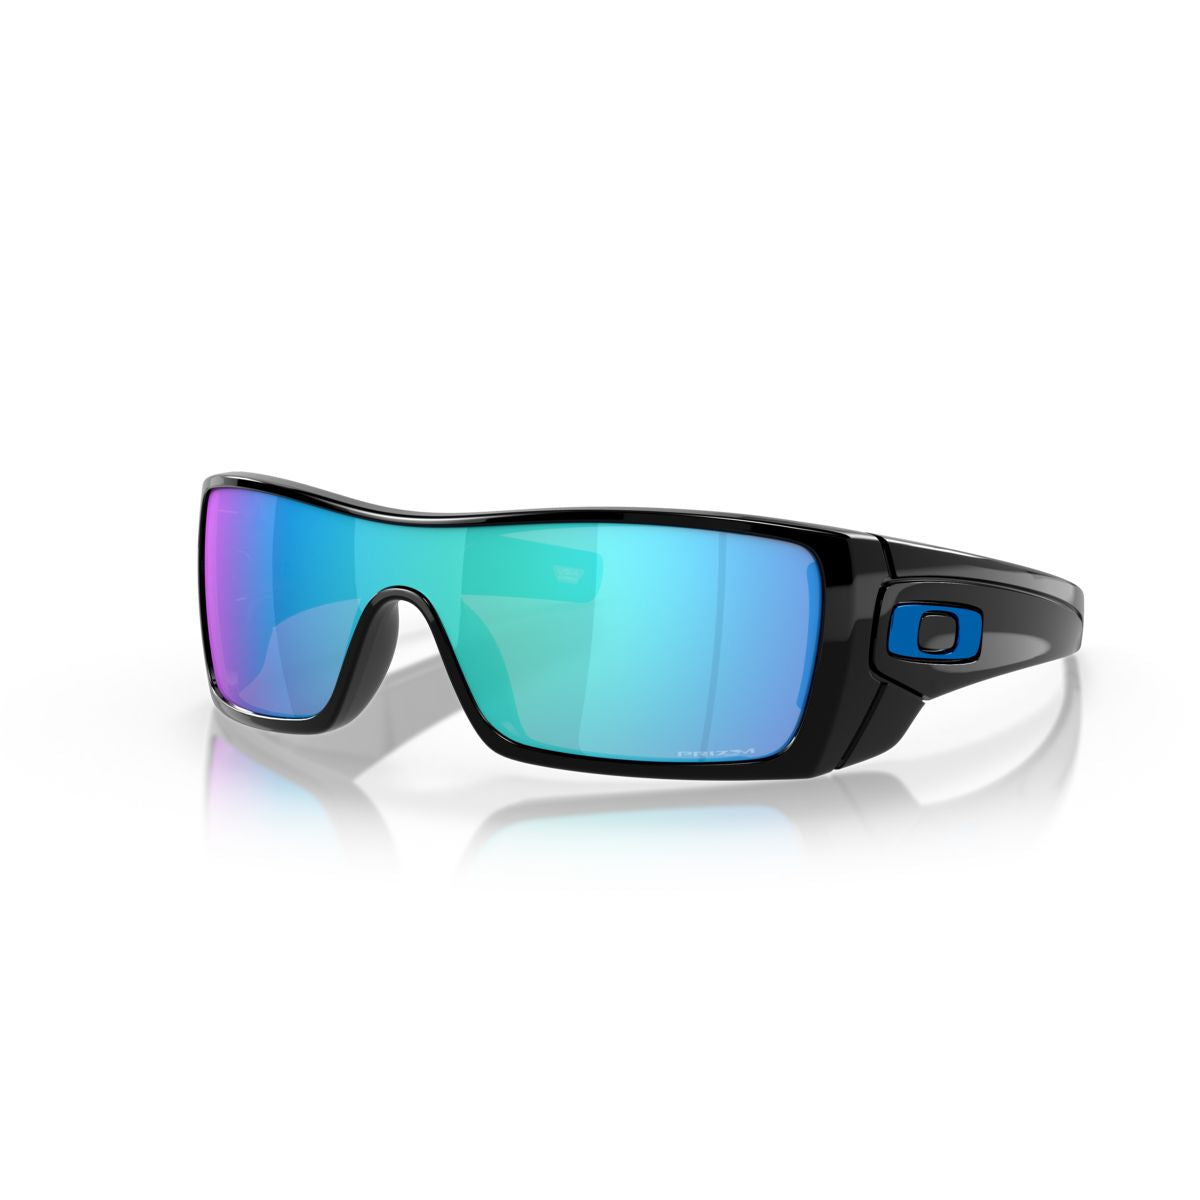 Oakley Batwolf Polished Black/Prizm Sapphire 0OO9101-910158 - Cam2 Trail  Running & Outdoor Gear Store